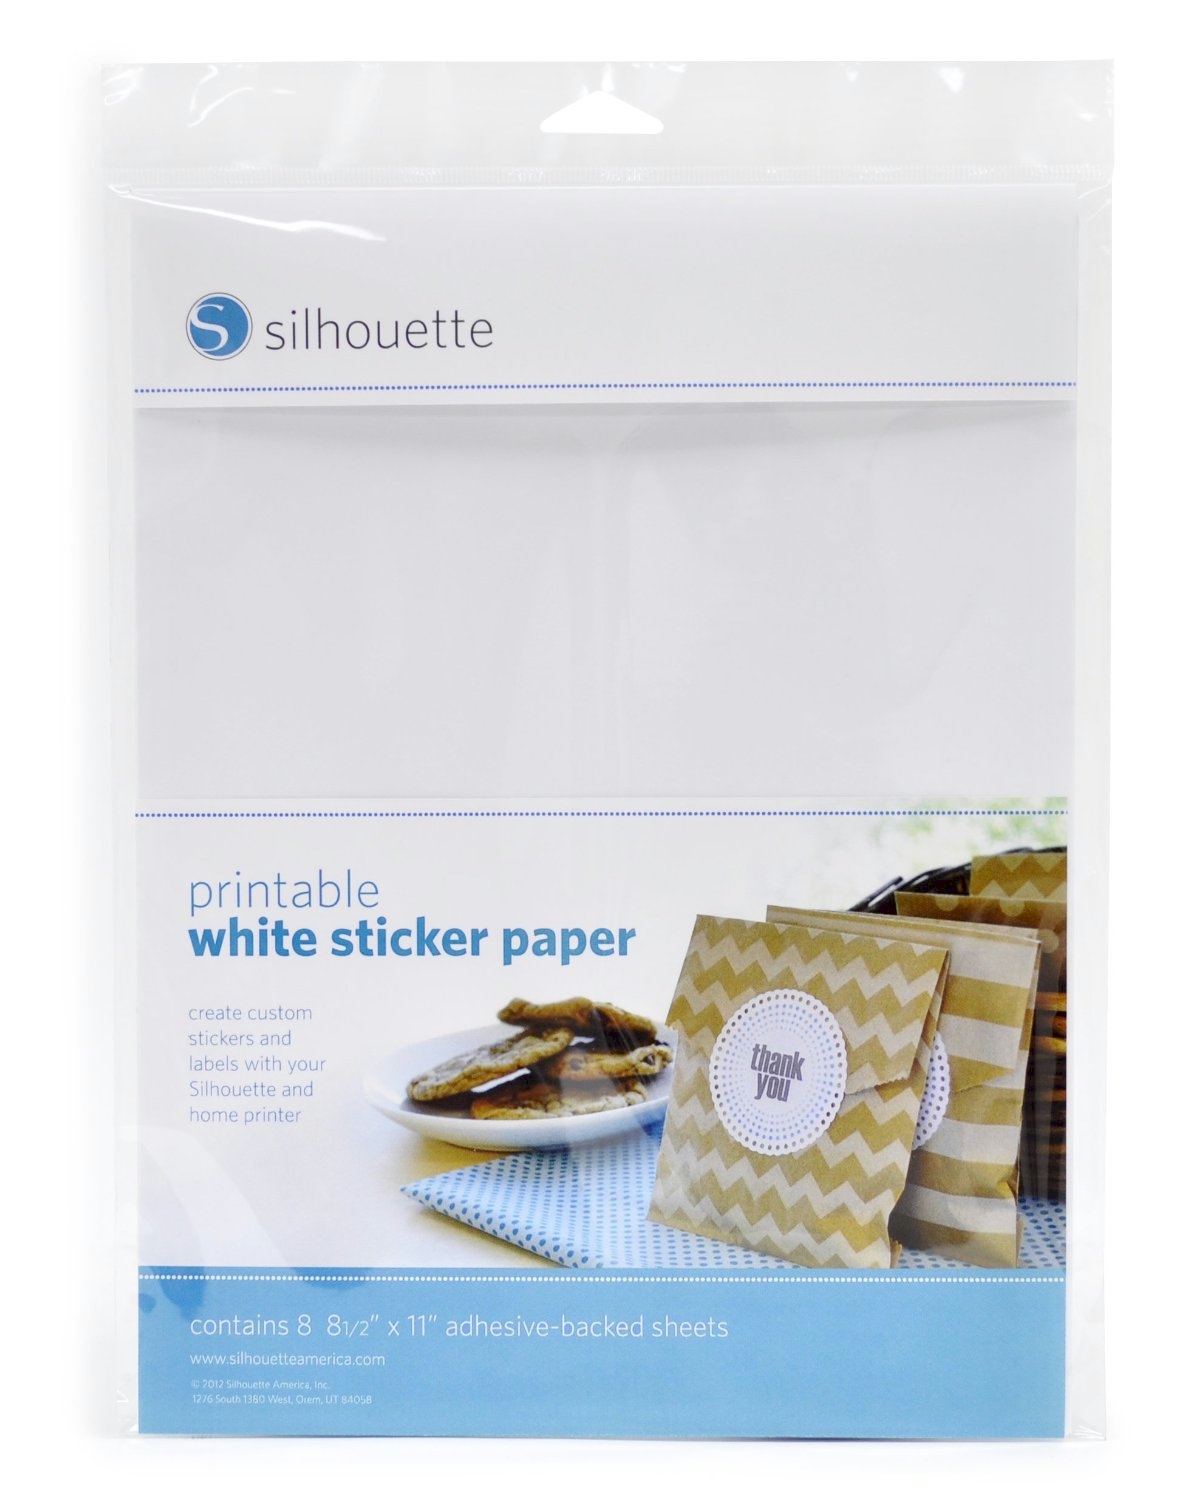 Silhouette Printable White Sticker Paper - 8 - 8.5" x 11" Sheets - CLOSEOUT